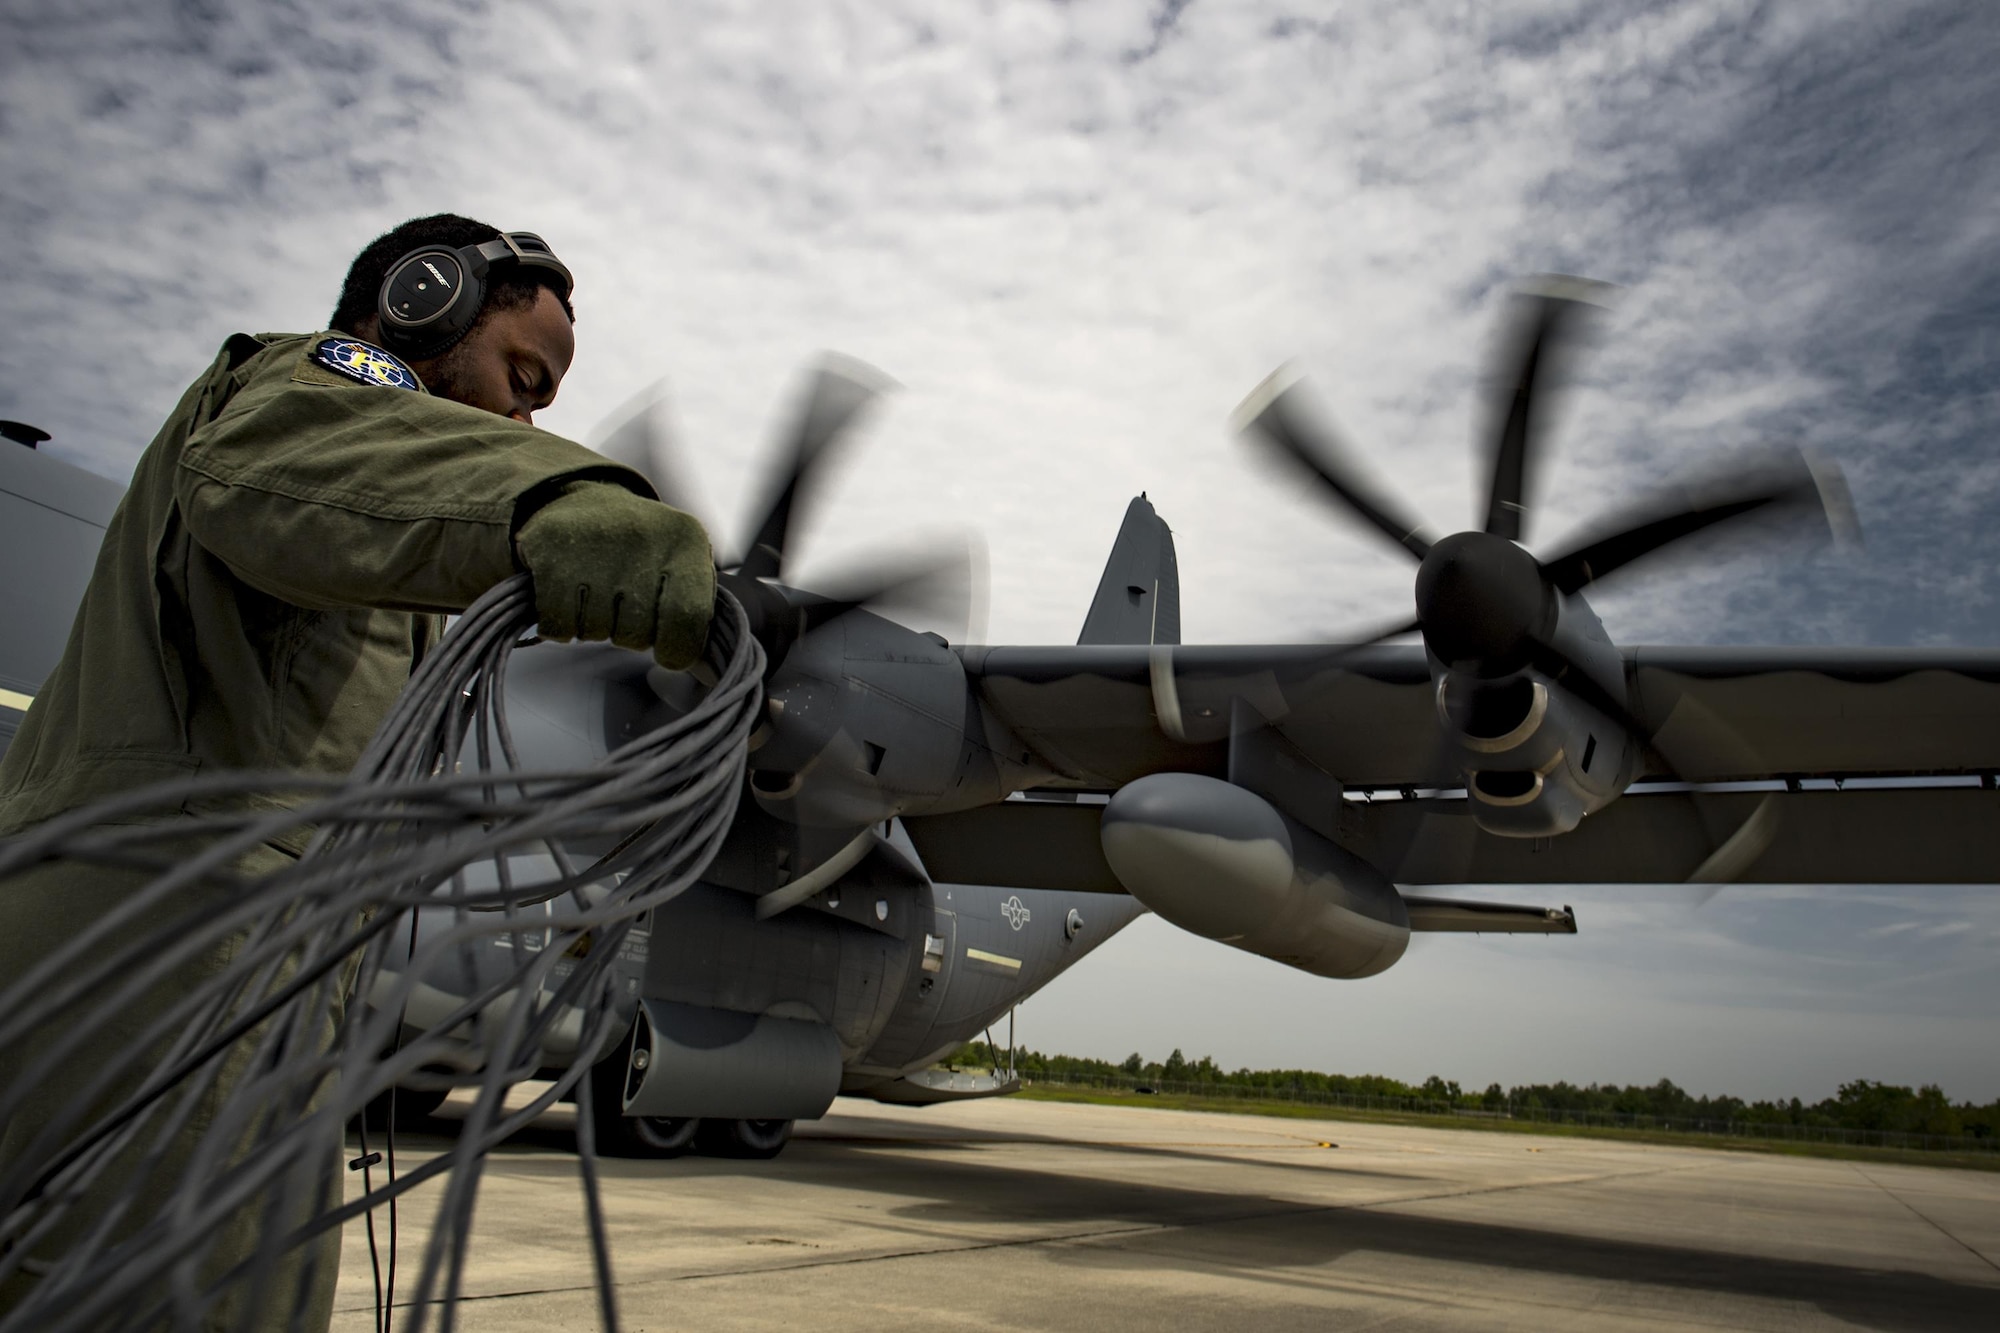 Staff Sgt. Jaime Richardson-Granger, 71st Rescue Squadron loadmaster, bundles a communications cord during engine start-up, May 31, 2017, at Moody Air Force Base, Ga. Responsibilities will vary depending on the aircraft, but generally, loadmasters are responsible for pre-flight inspections of aircraft, loading and unloading of cargo and conducting in-flight checklists. (U.S. Air Force photo by Staff Sgt. Ryan Callaghan)